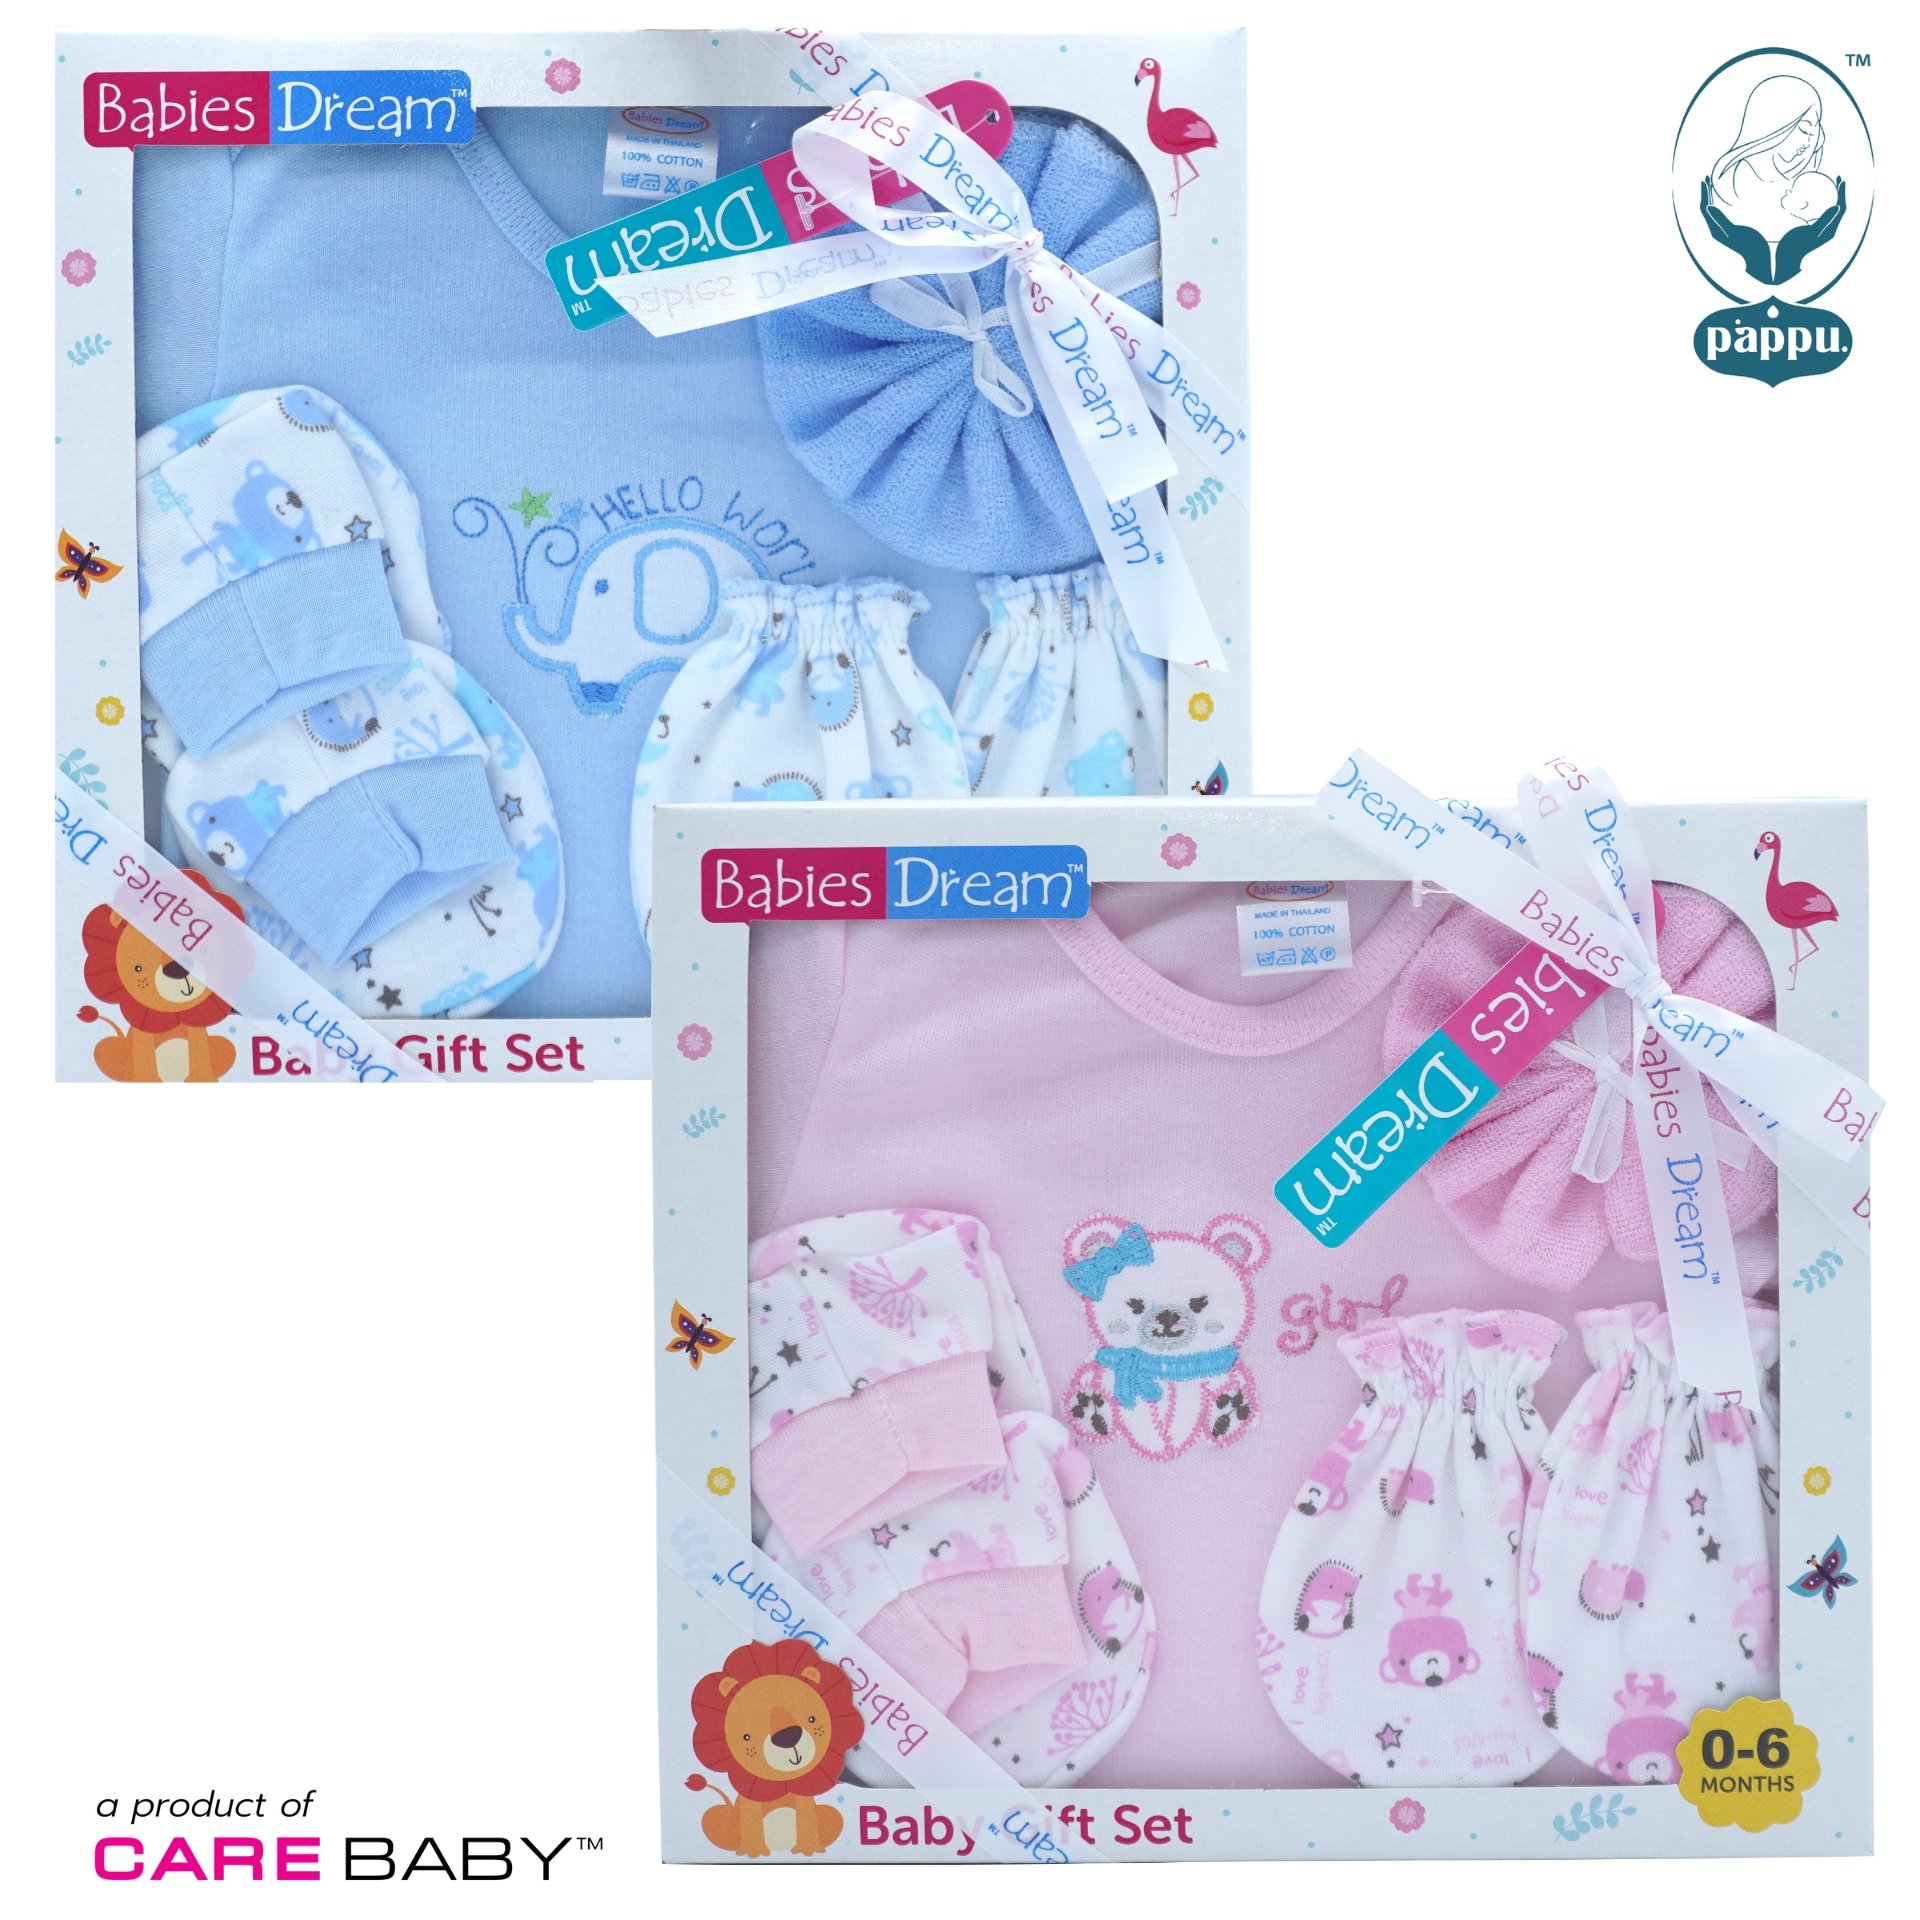 4 Pieces gift set for newborn